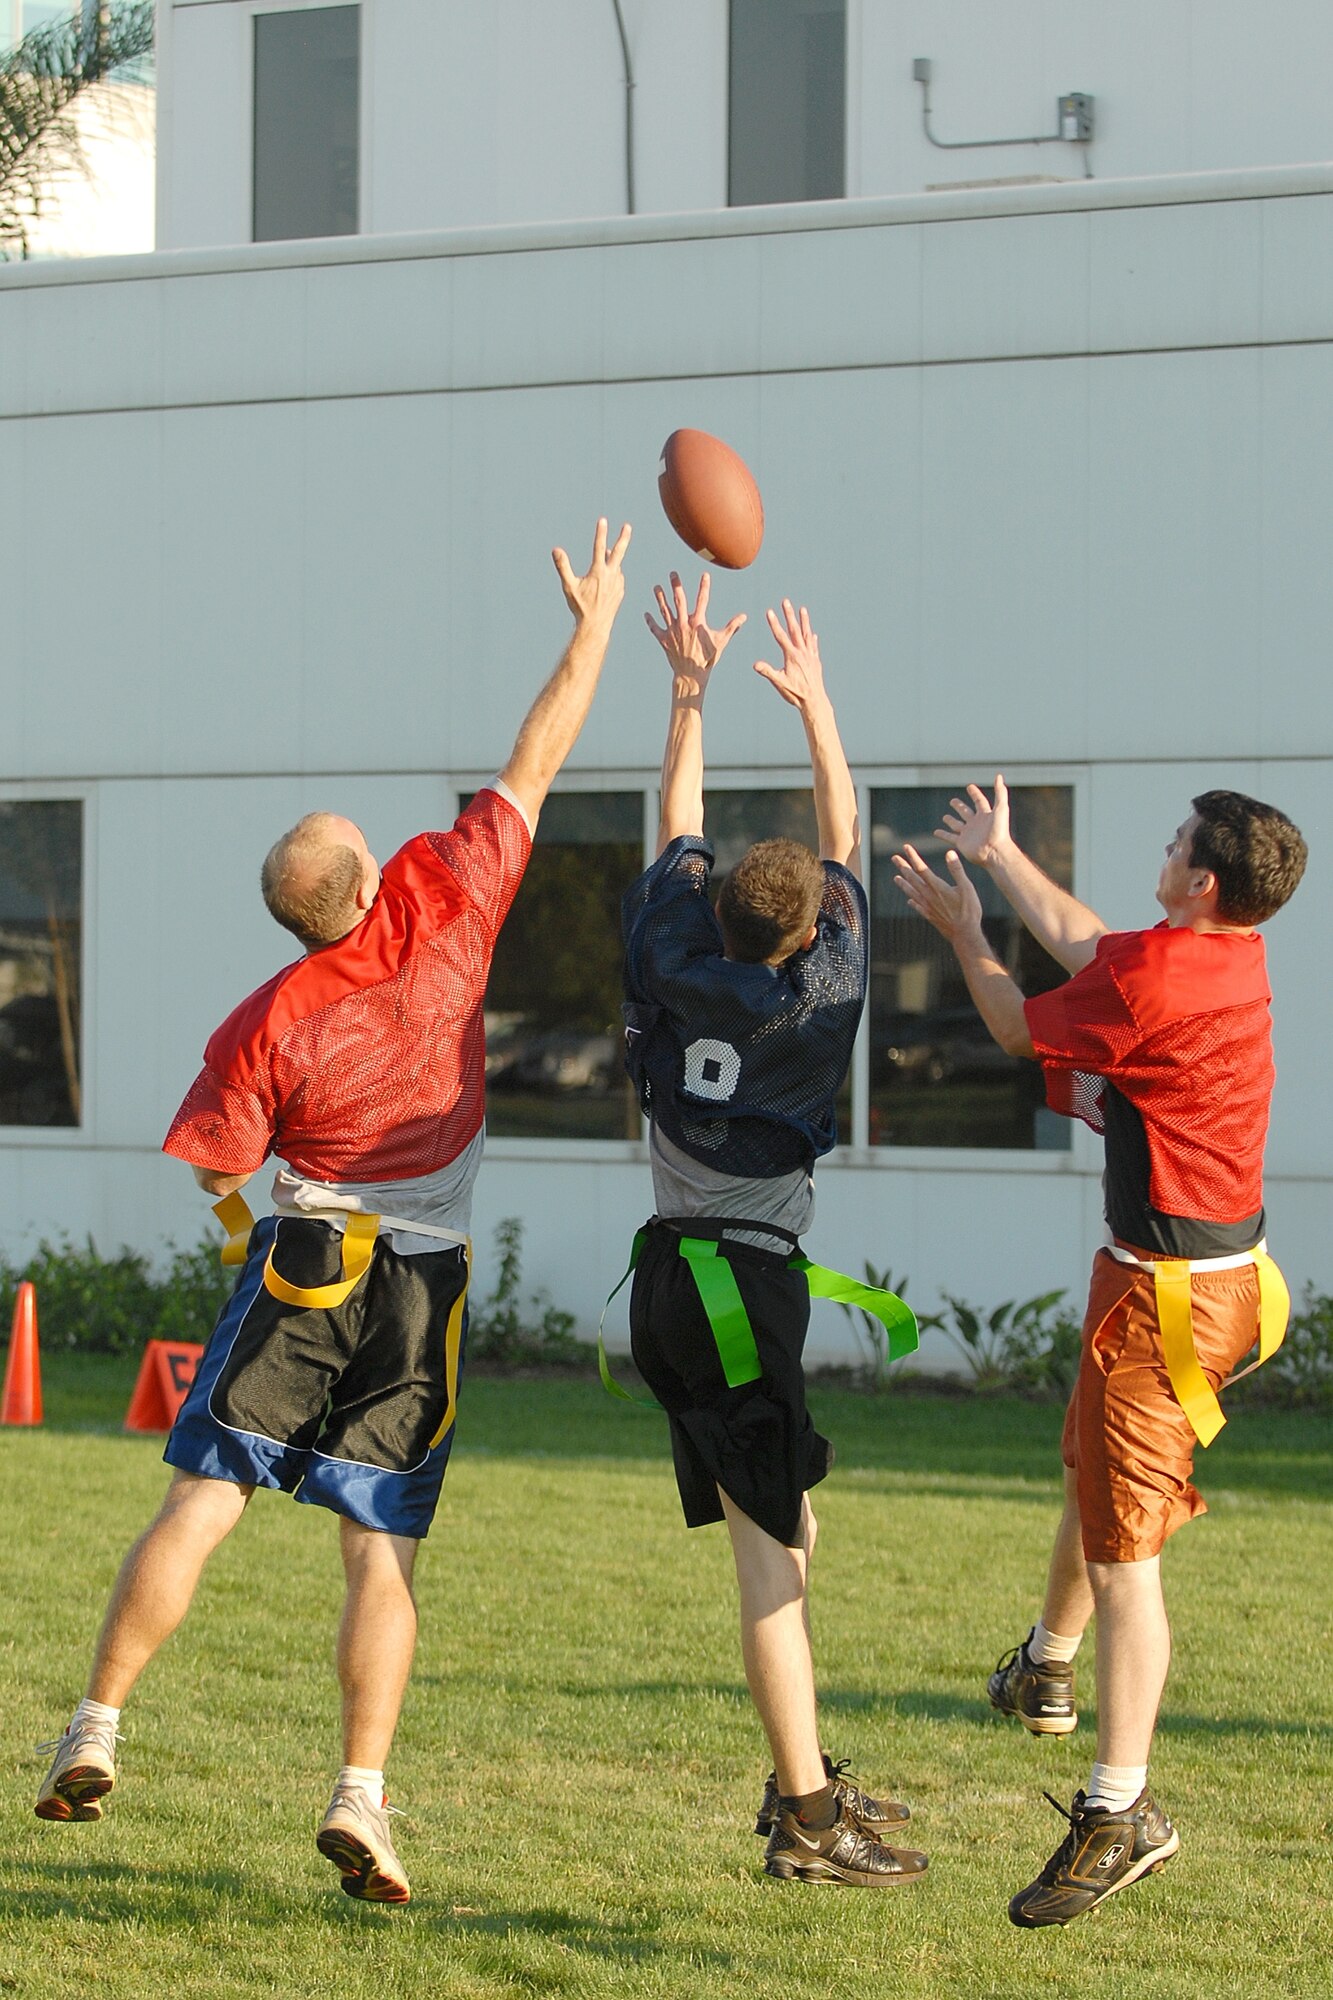 Senior Airman Jacob Clark (middle) attempts to receive a pass and while battling for control of the ball with Capt. Neil Moser and 1st Lt. Adam Young during a flag football game between the 61st Medical Group and Launch and Range Systems Wing, Sept. 25. The 61st Medical Group won 20 to19. (Photo by Stephen Schester)